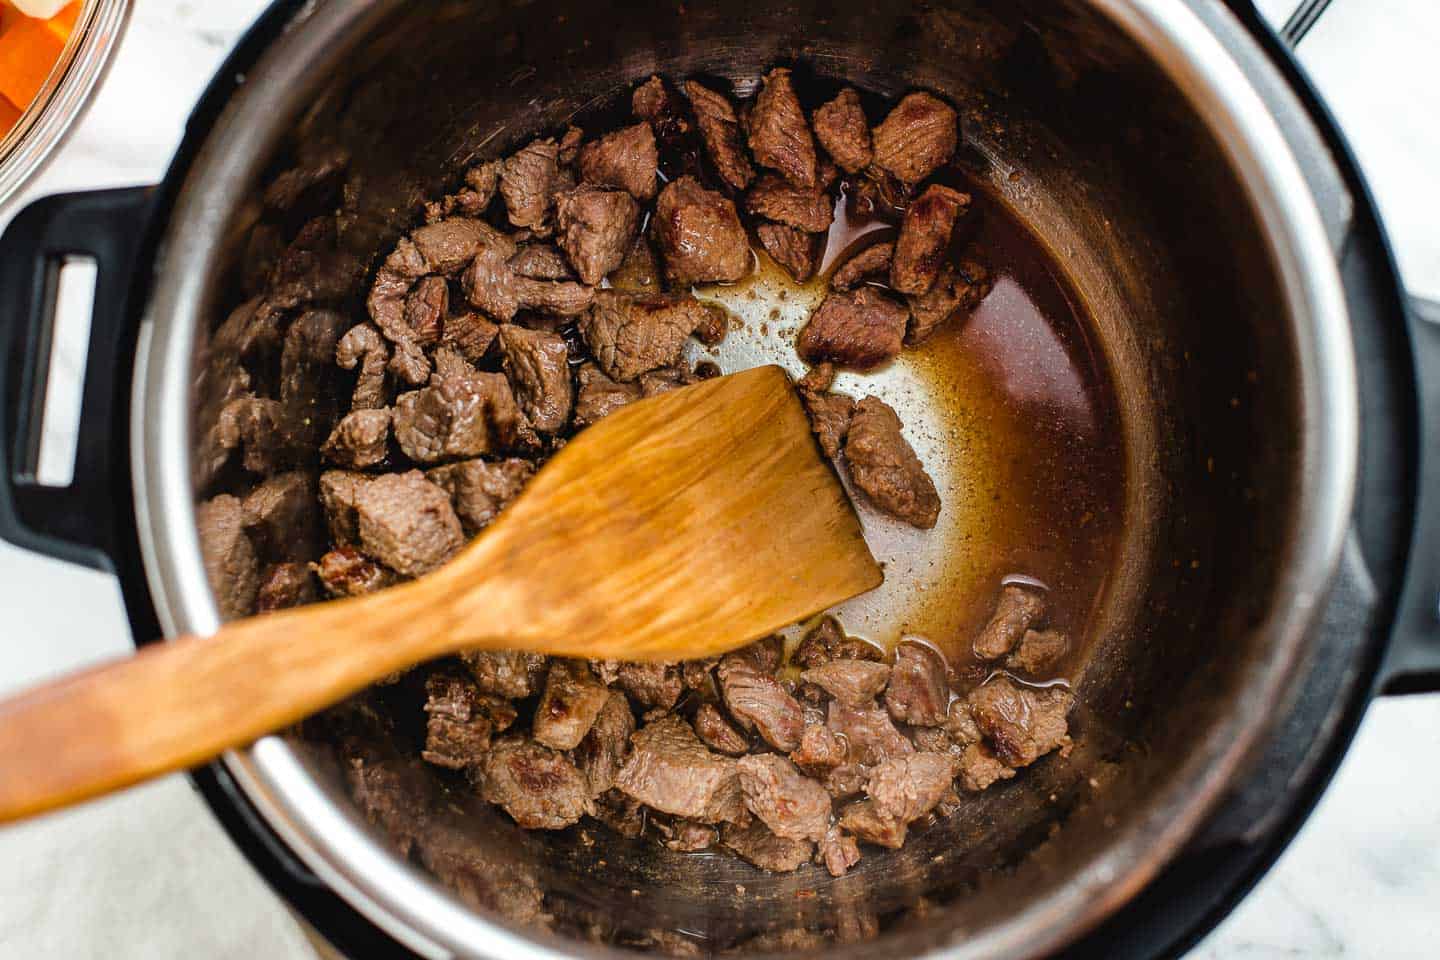 Chunks of beef browning in oil.